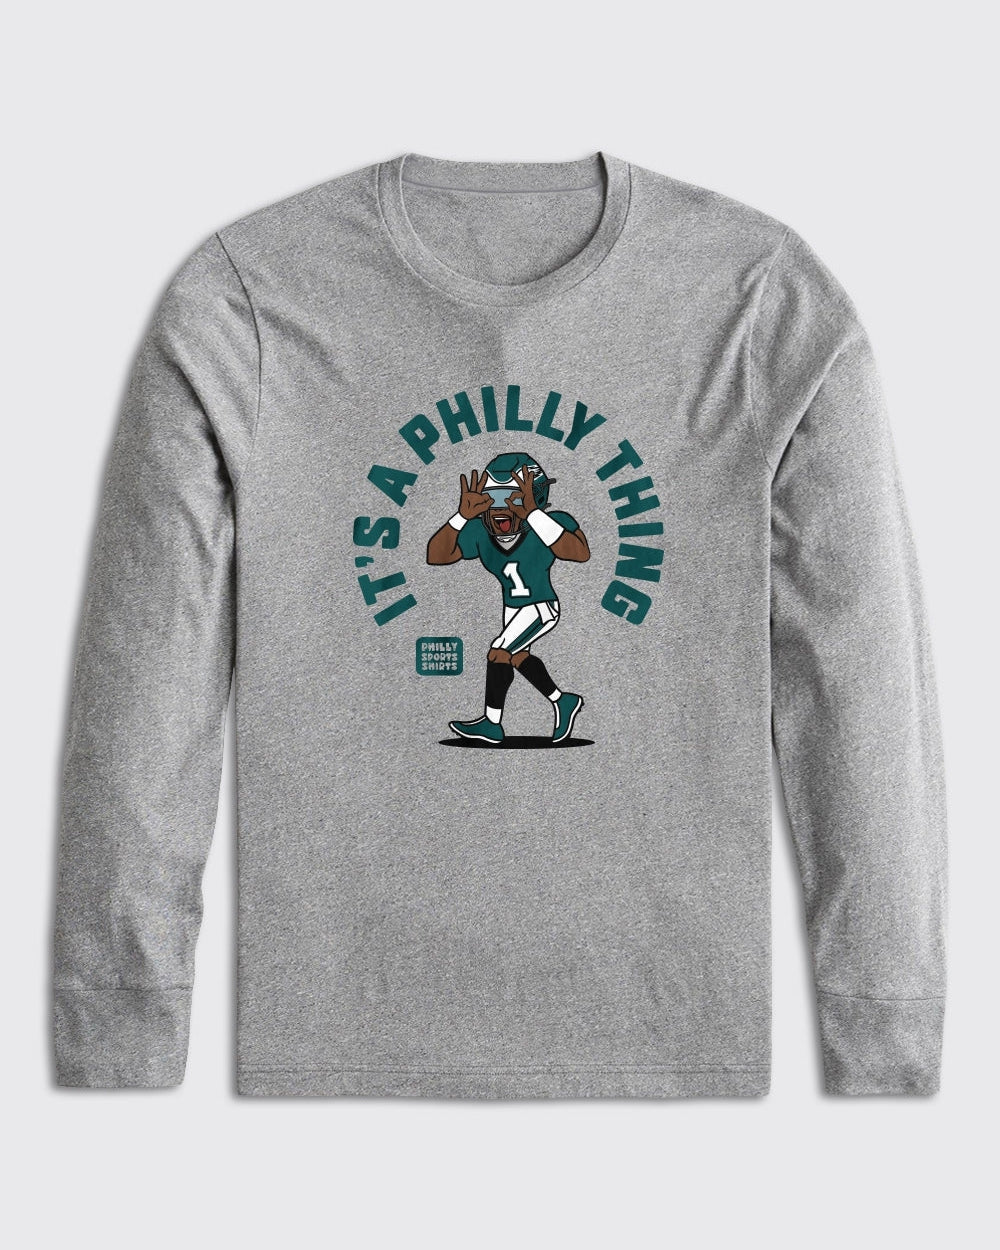 It's A Philly Thing Long Sleeve - Philly Sports Shirts